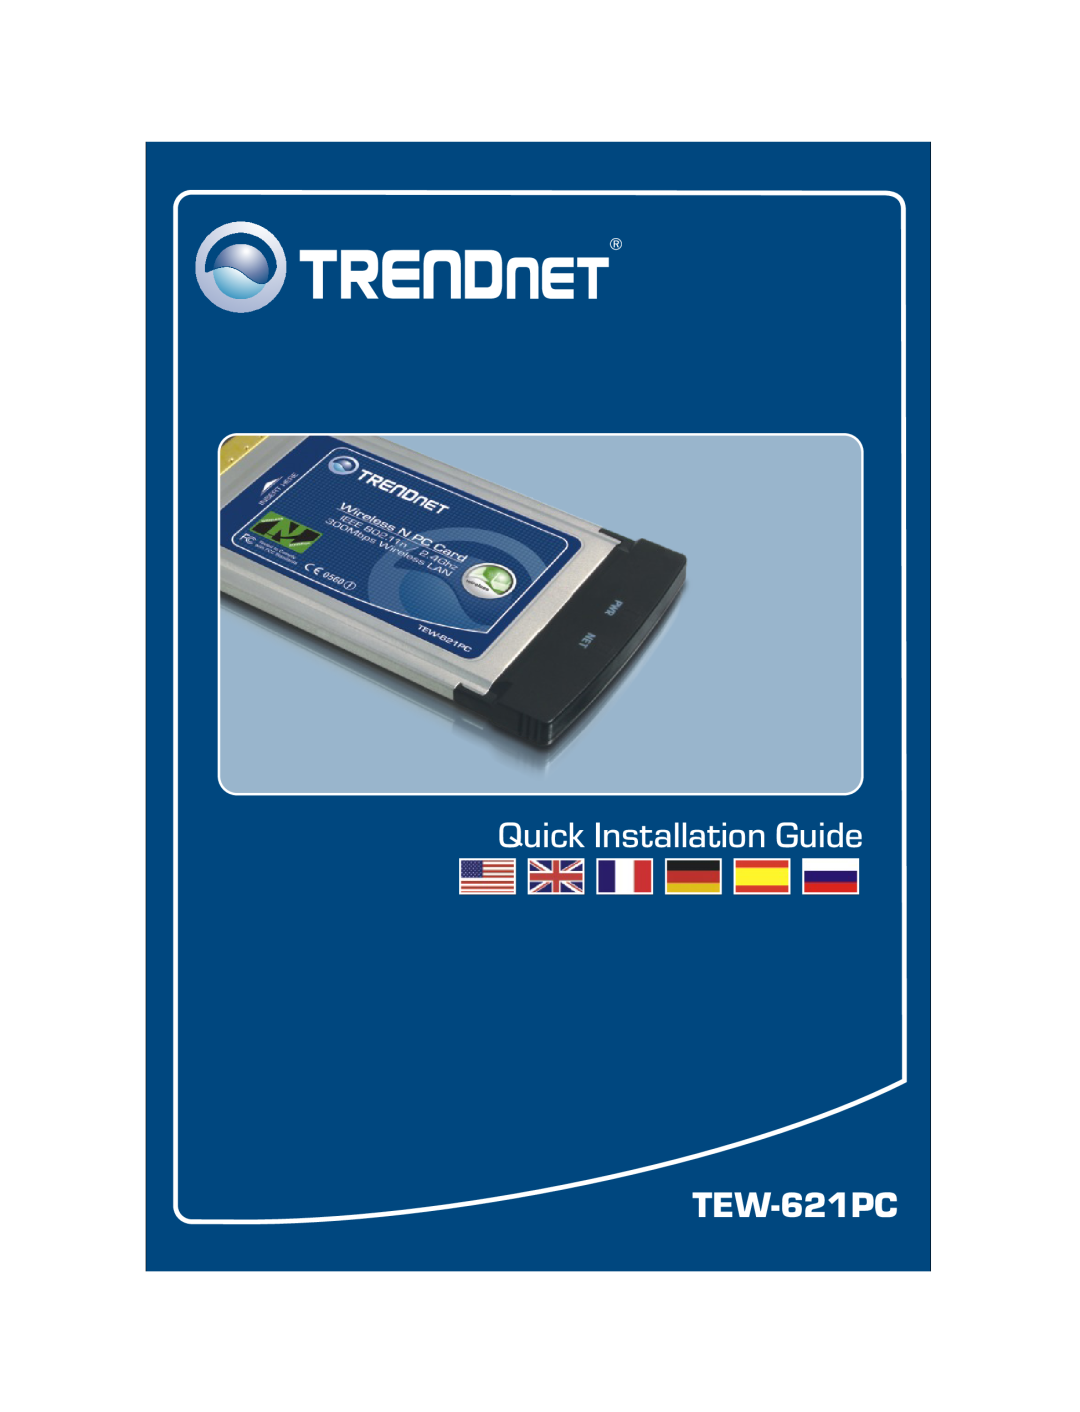 TRENDnet TEW-621PC manual Quick Installation Guide 